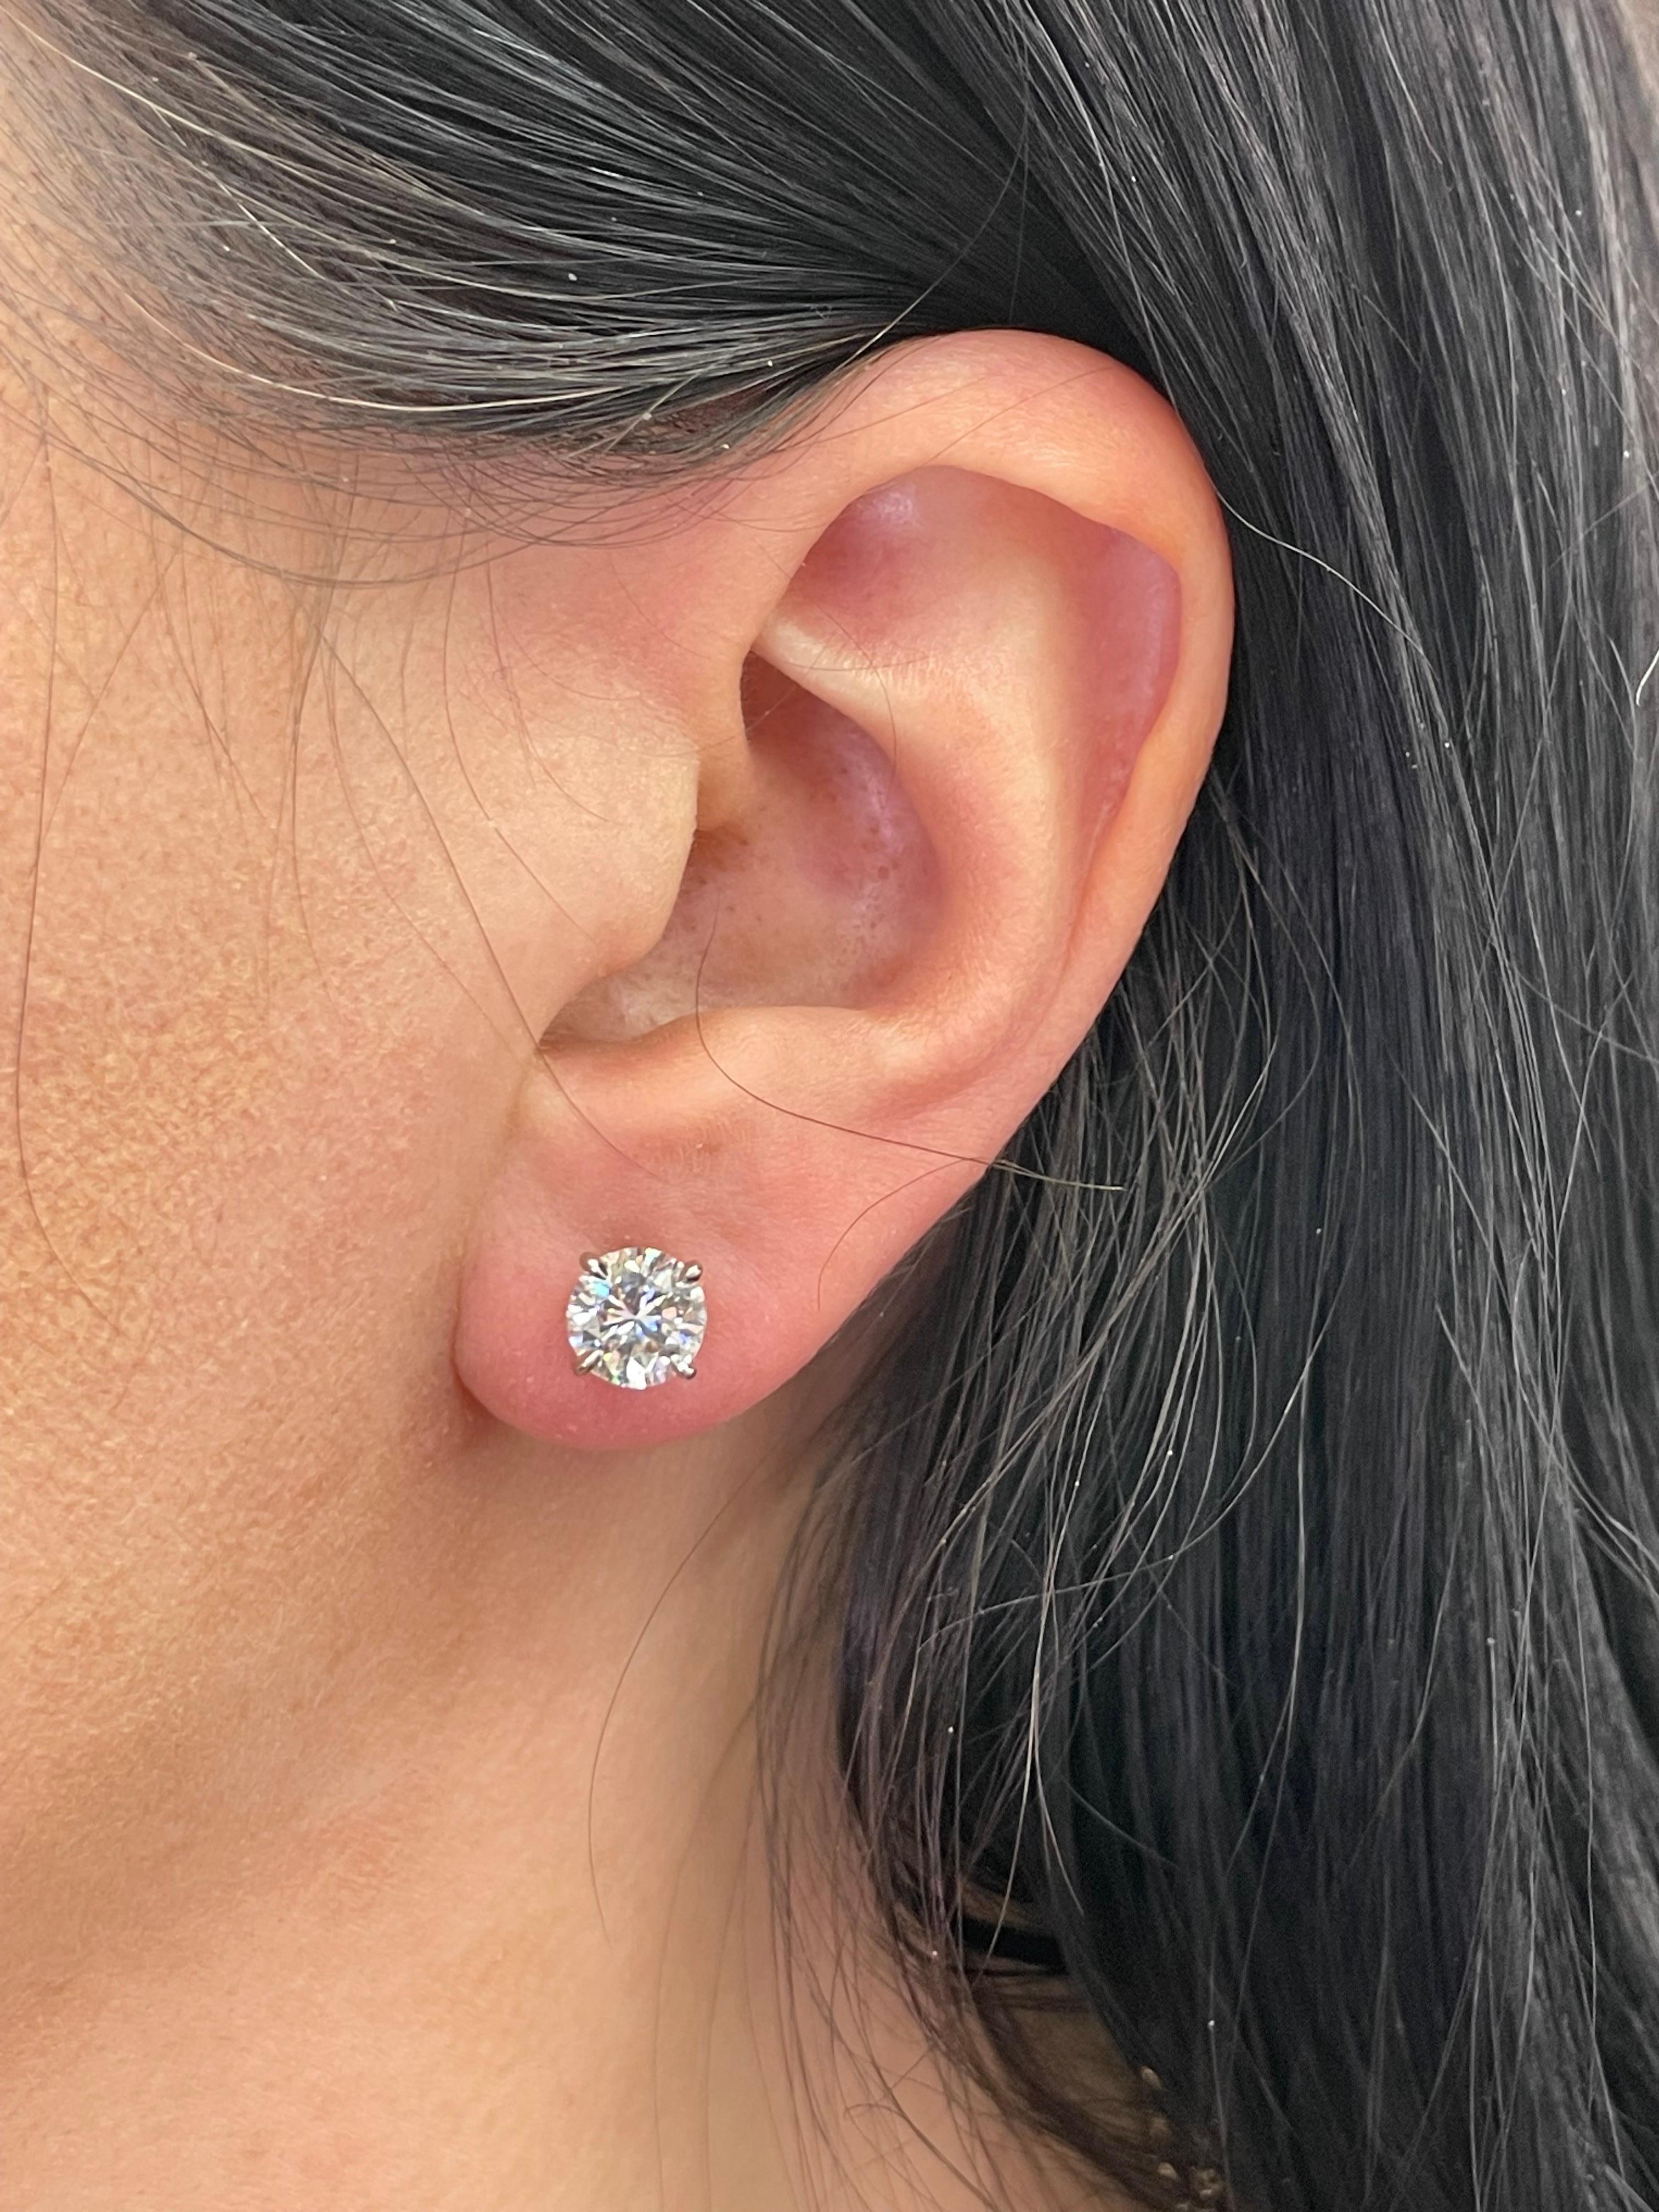 Diamond stud earrings weighing 2.01 Carats, in 18 Karat White Gold 3 Prong Champagne Setting.
Color H
Clarity I1
Nice Color, 90% Eye Clean-ish

Setting can be changed to a Basket, Martini or Champagne/ 3 or 4 Prong/ 14 or 18 Karat.

DM for more Info